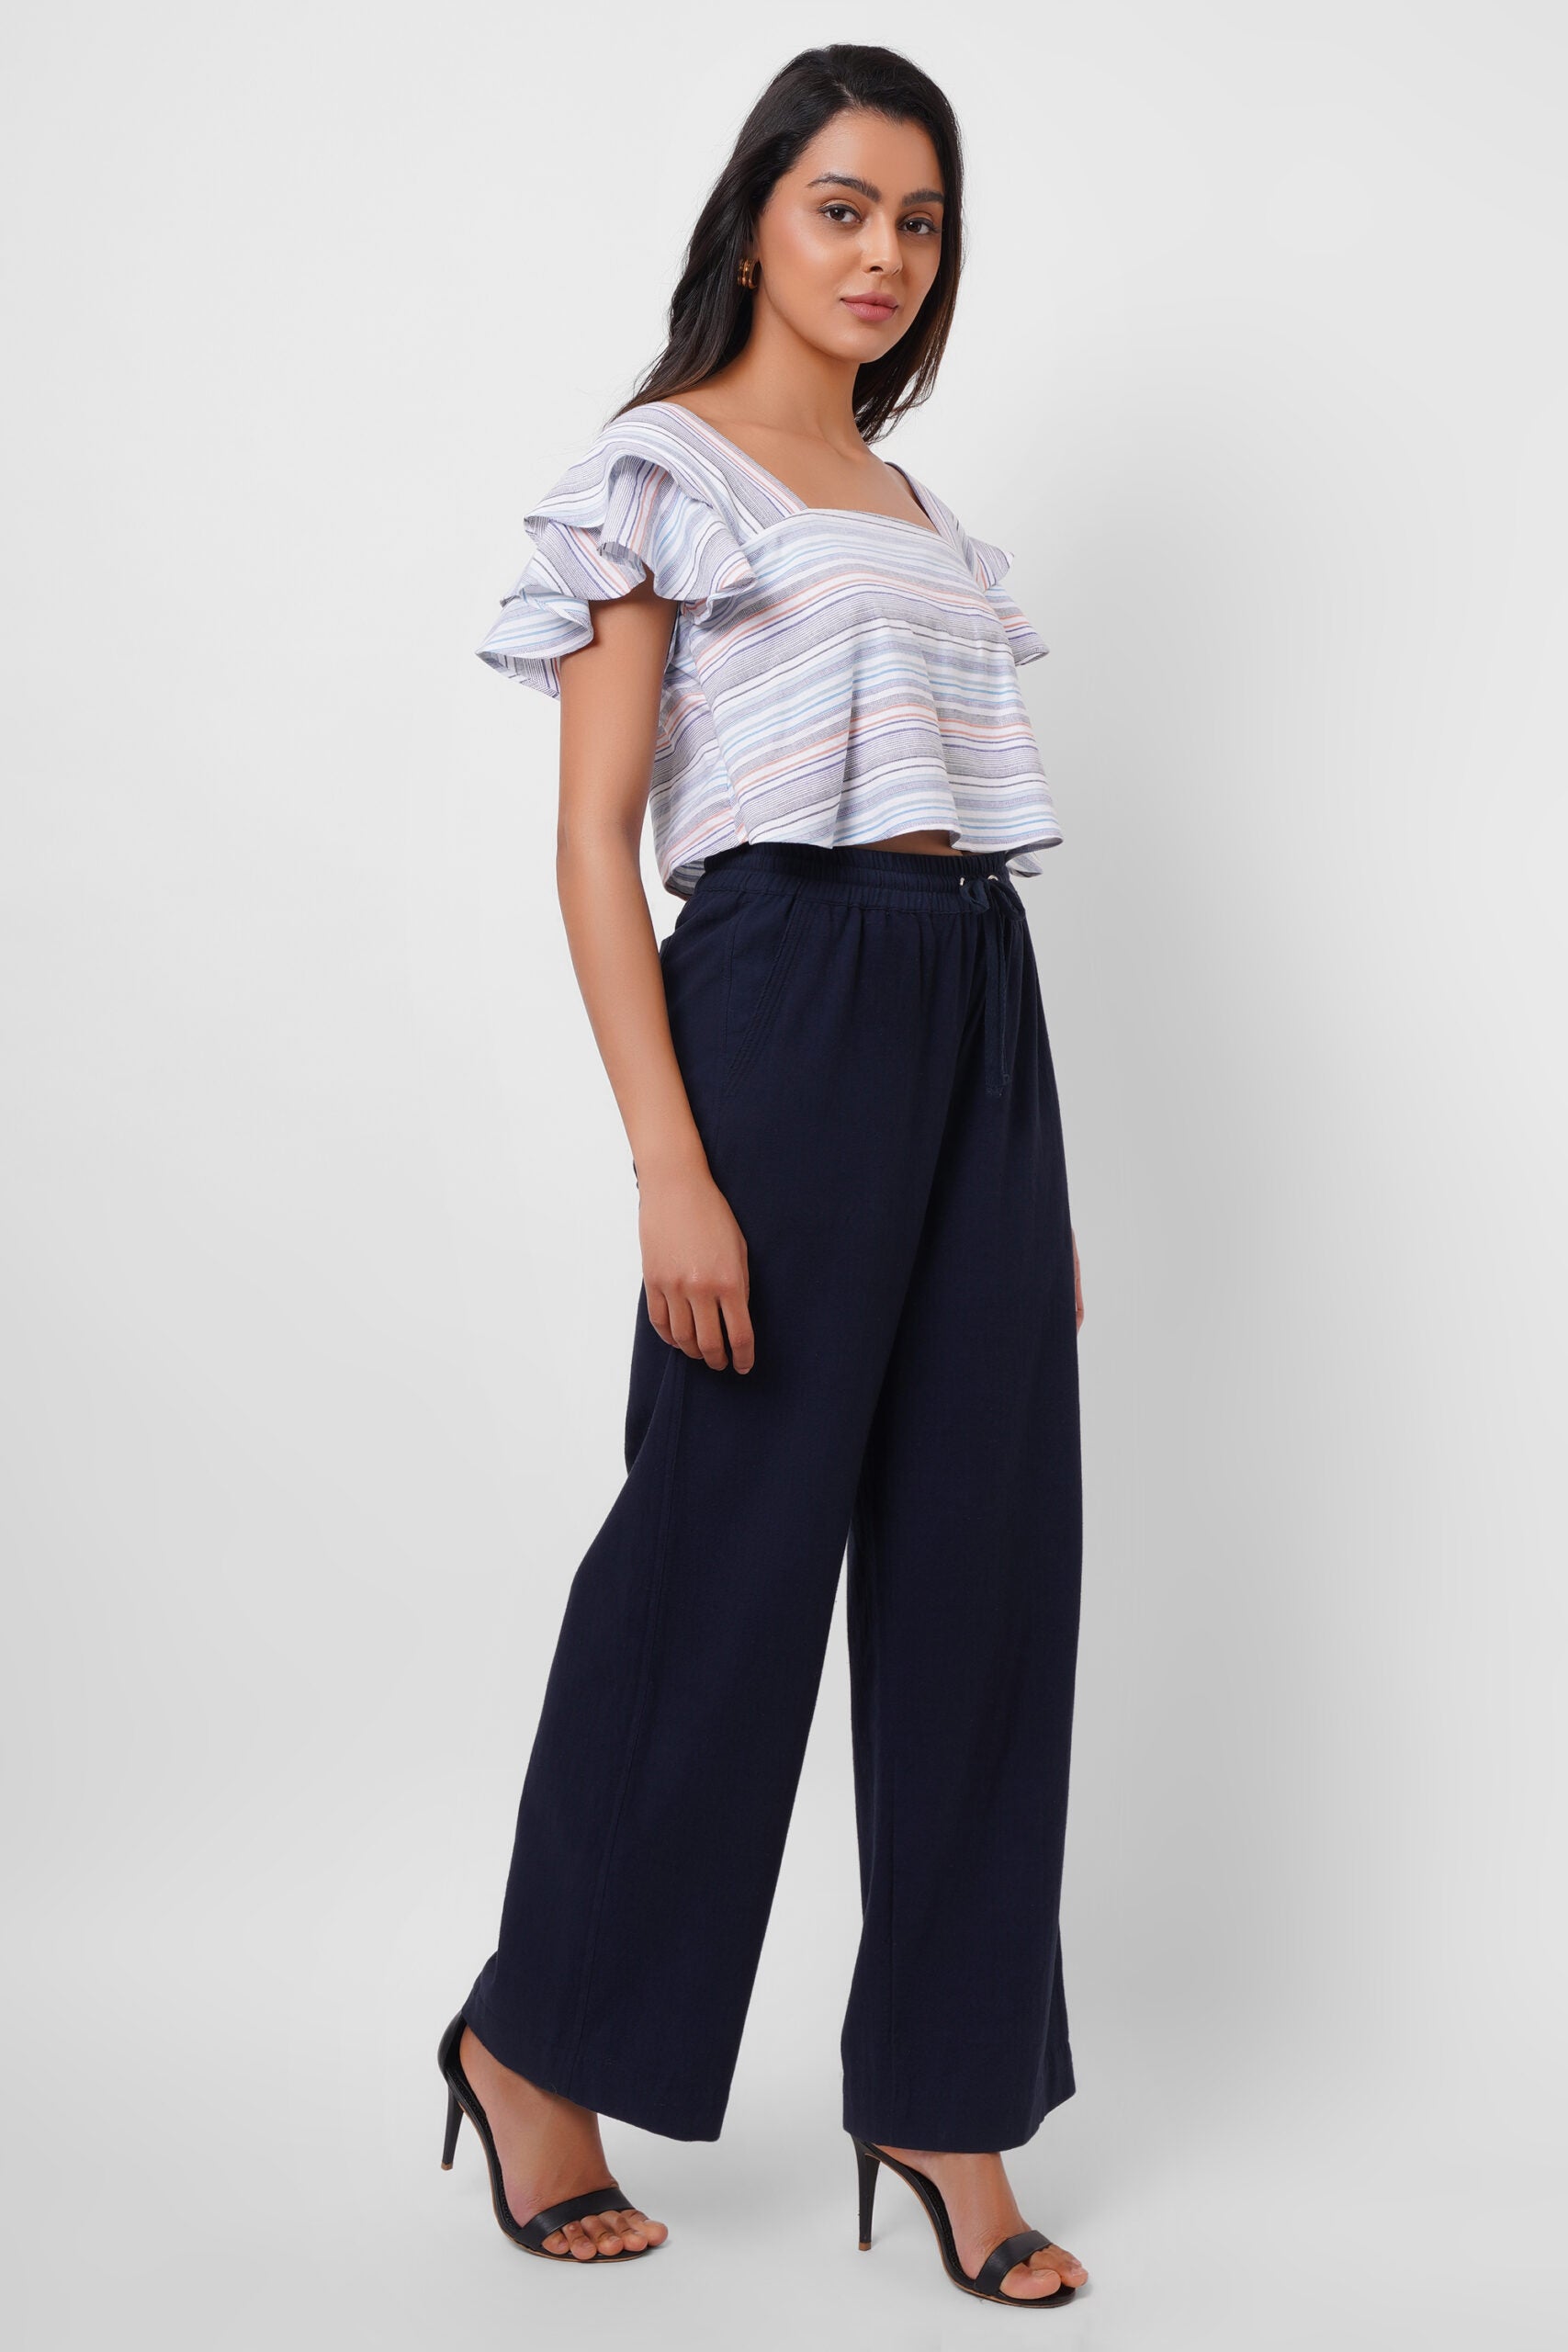 Square Neck Blue Yarn Dyed Crop Top - Western Era  Tops